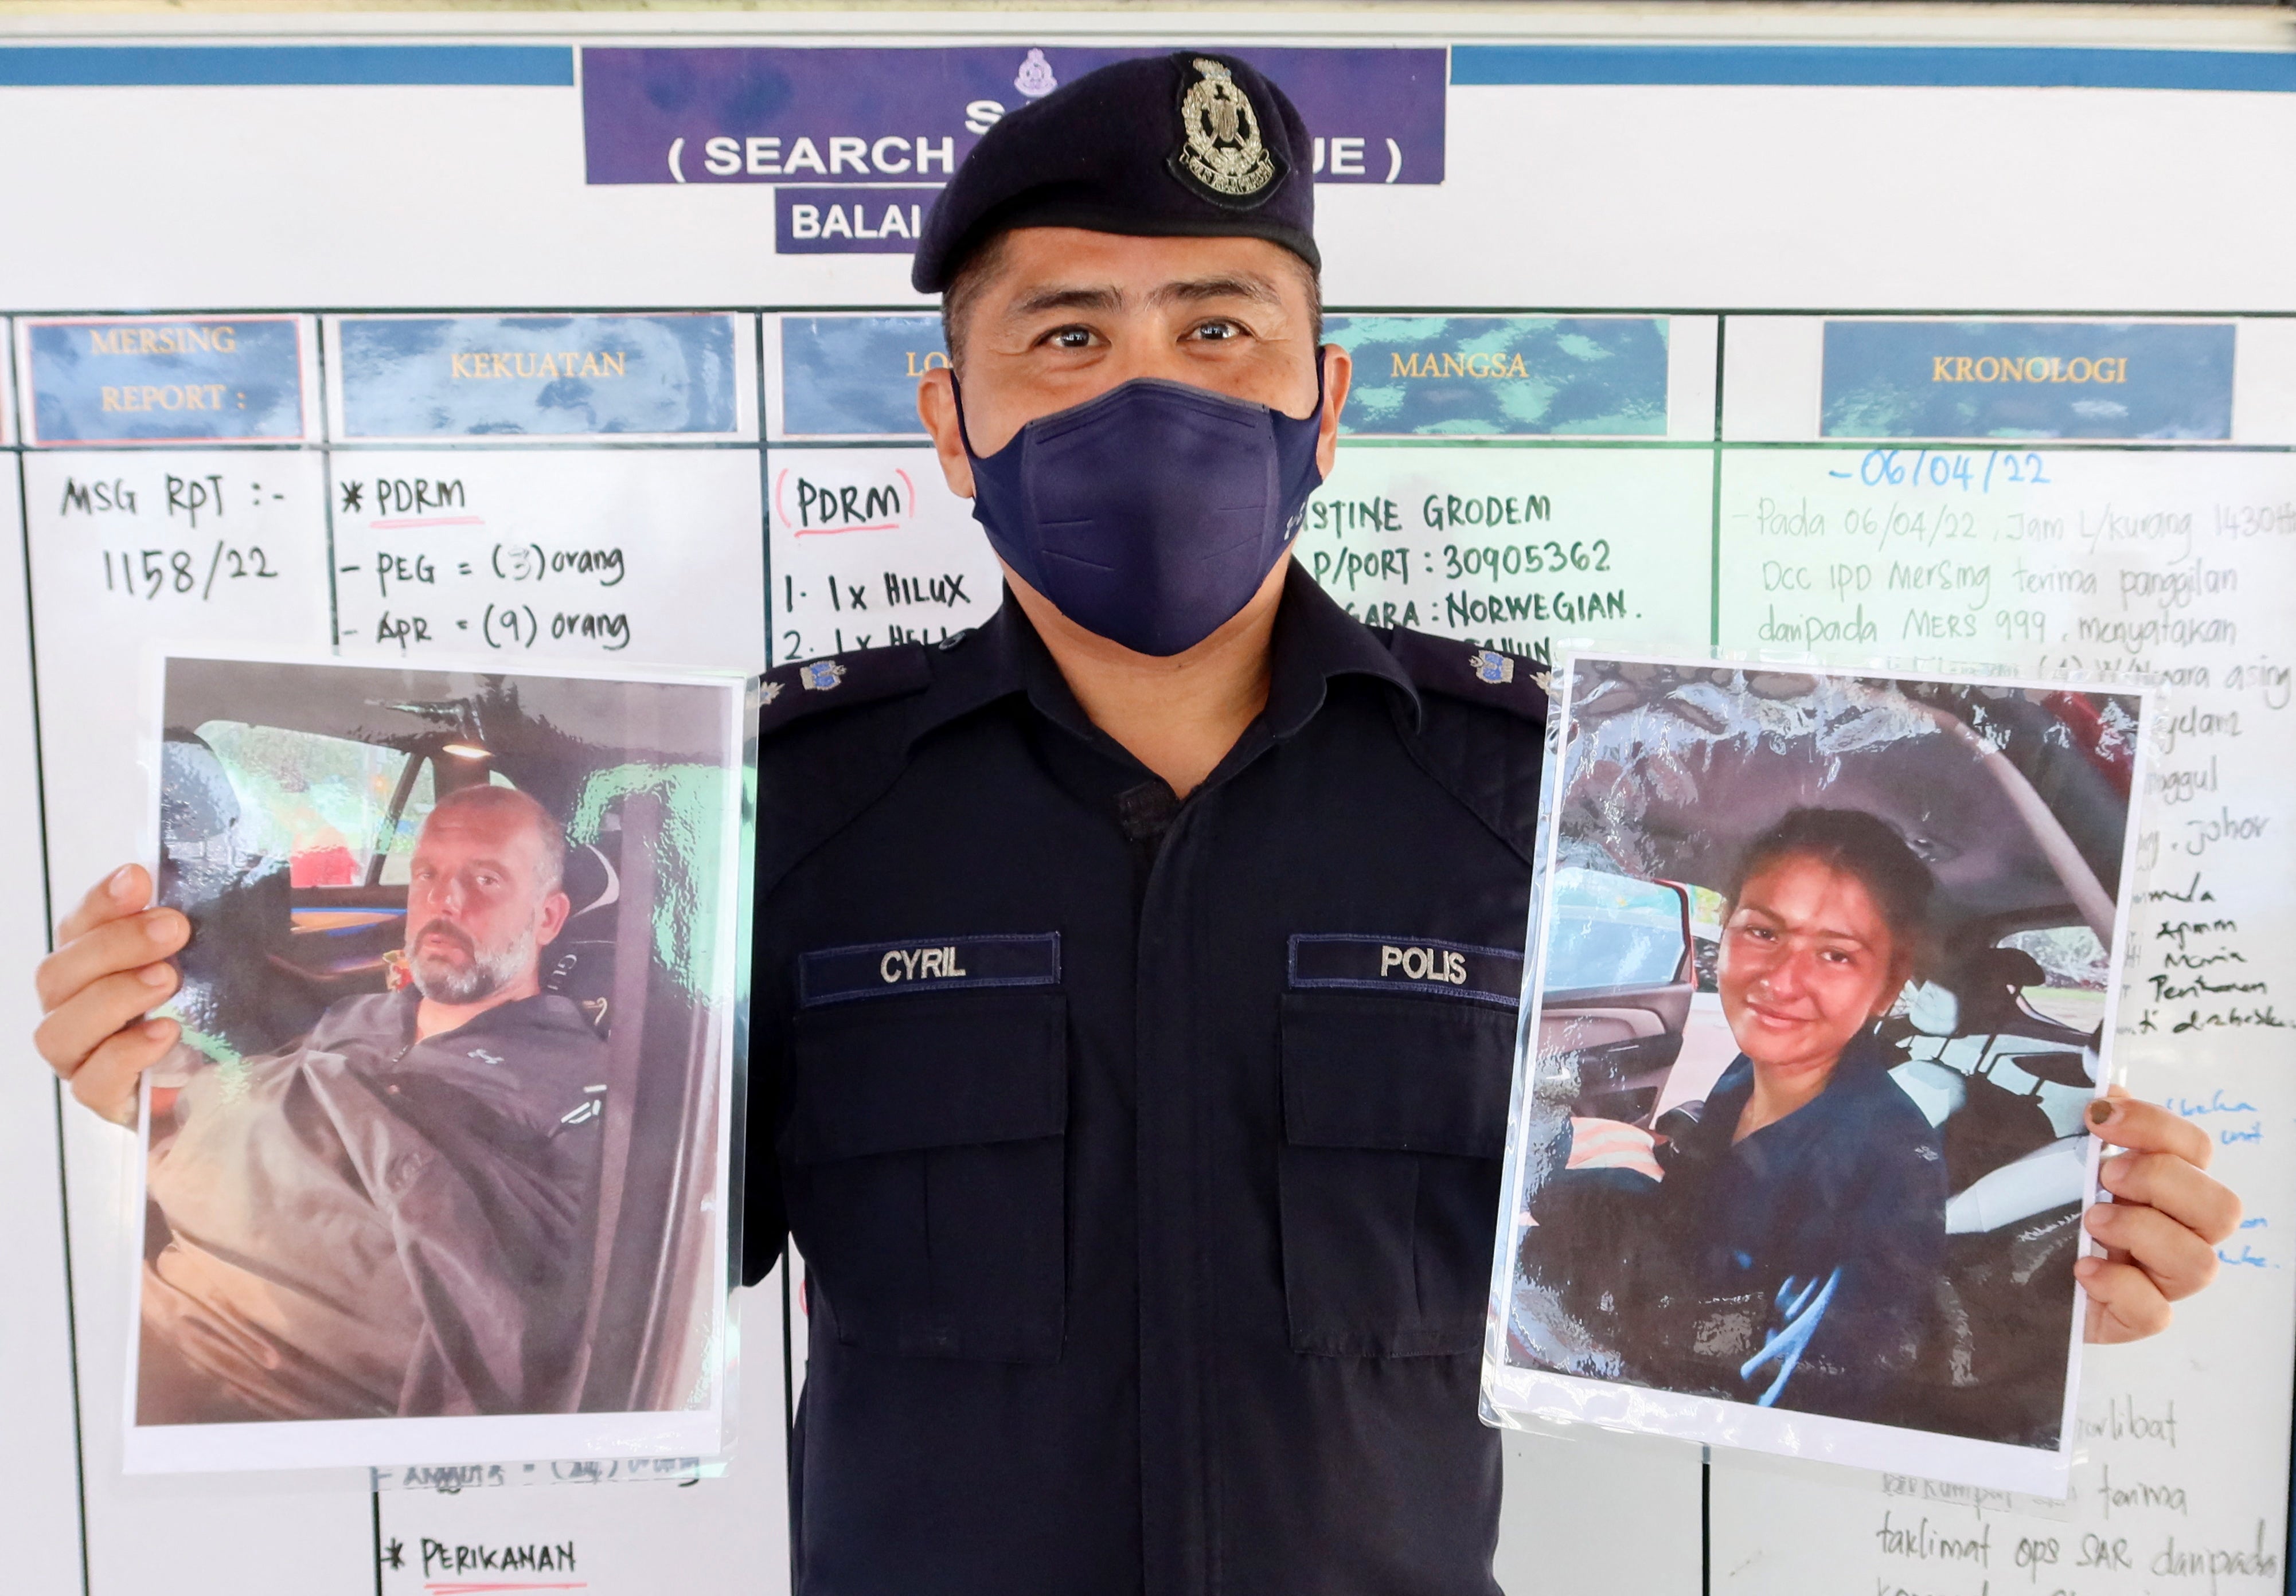 A Mersing district police officer shows the pictures of Adrian Peter Chesters and Alexia Molina, who were rescued at around 1am on Saturday